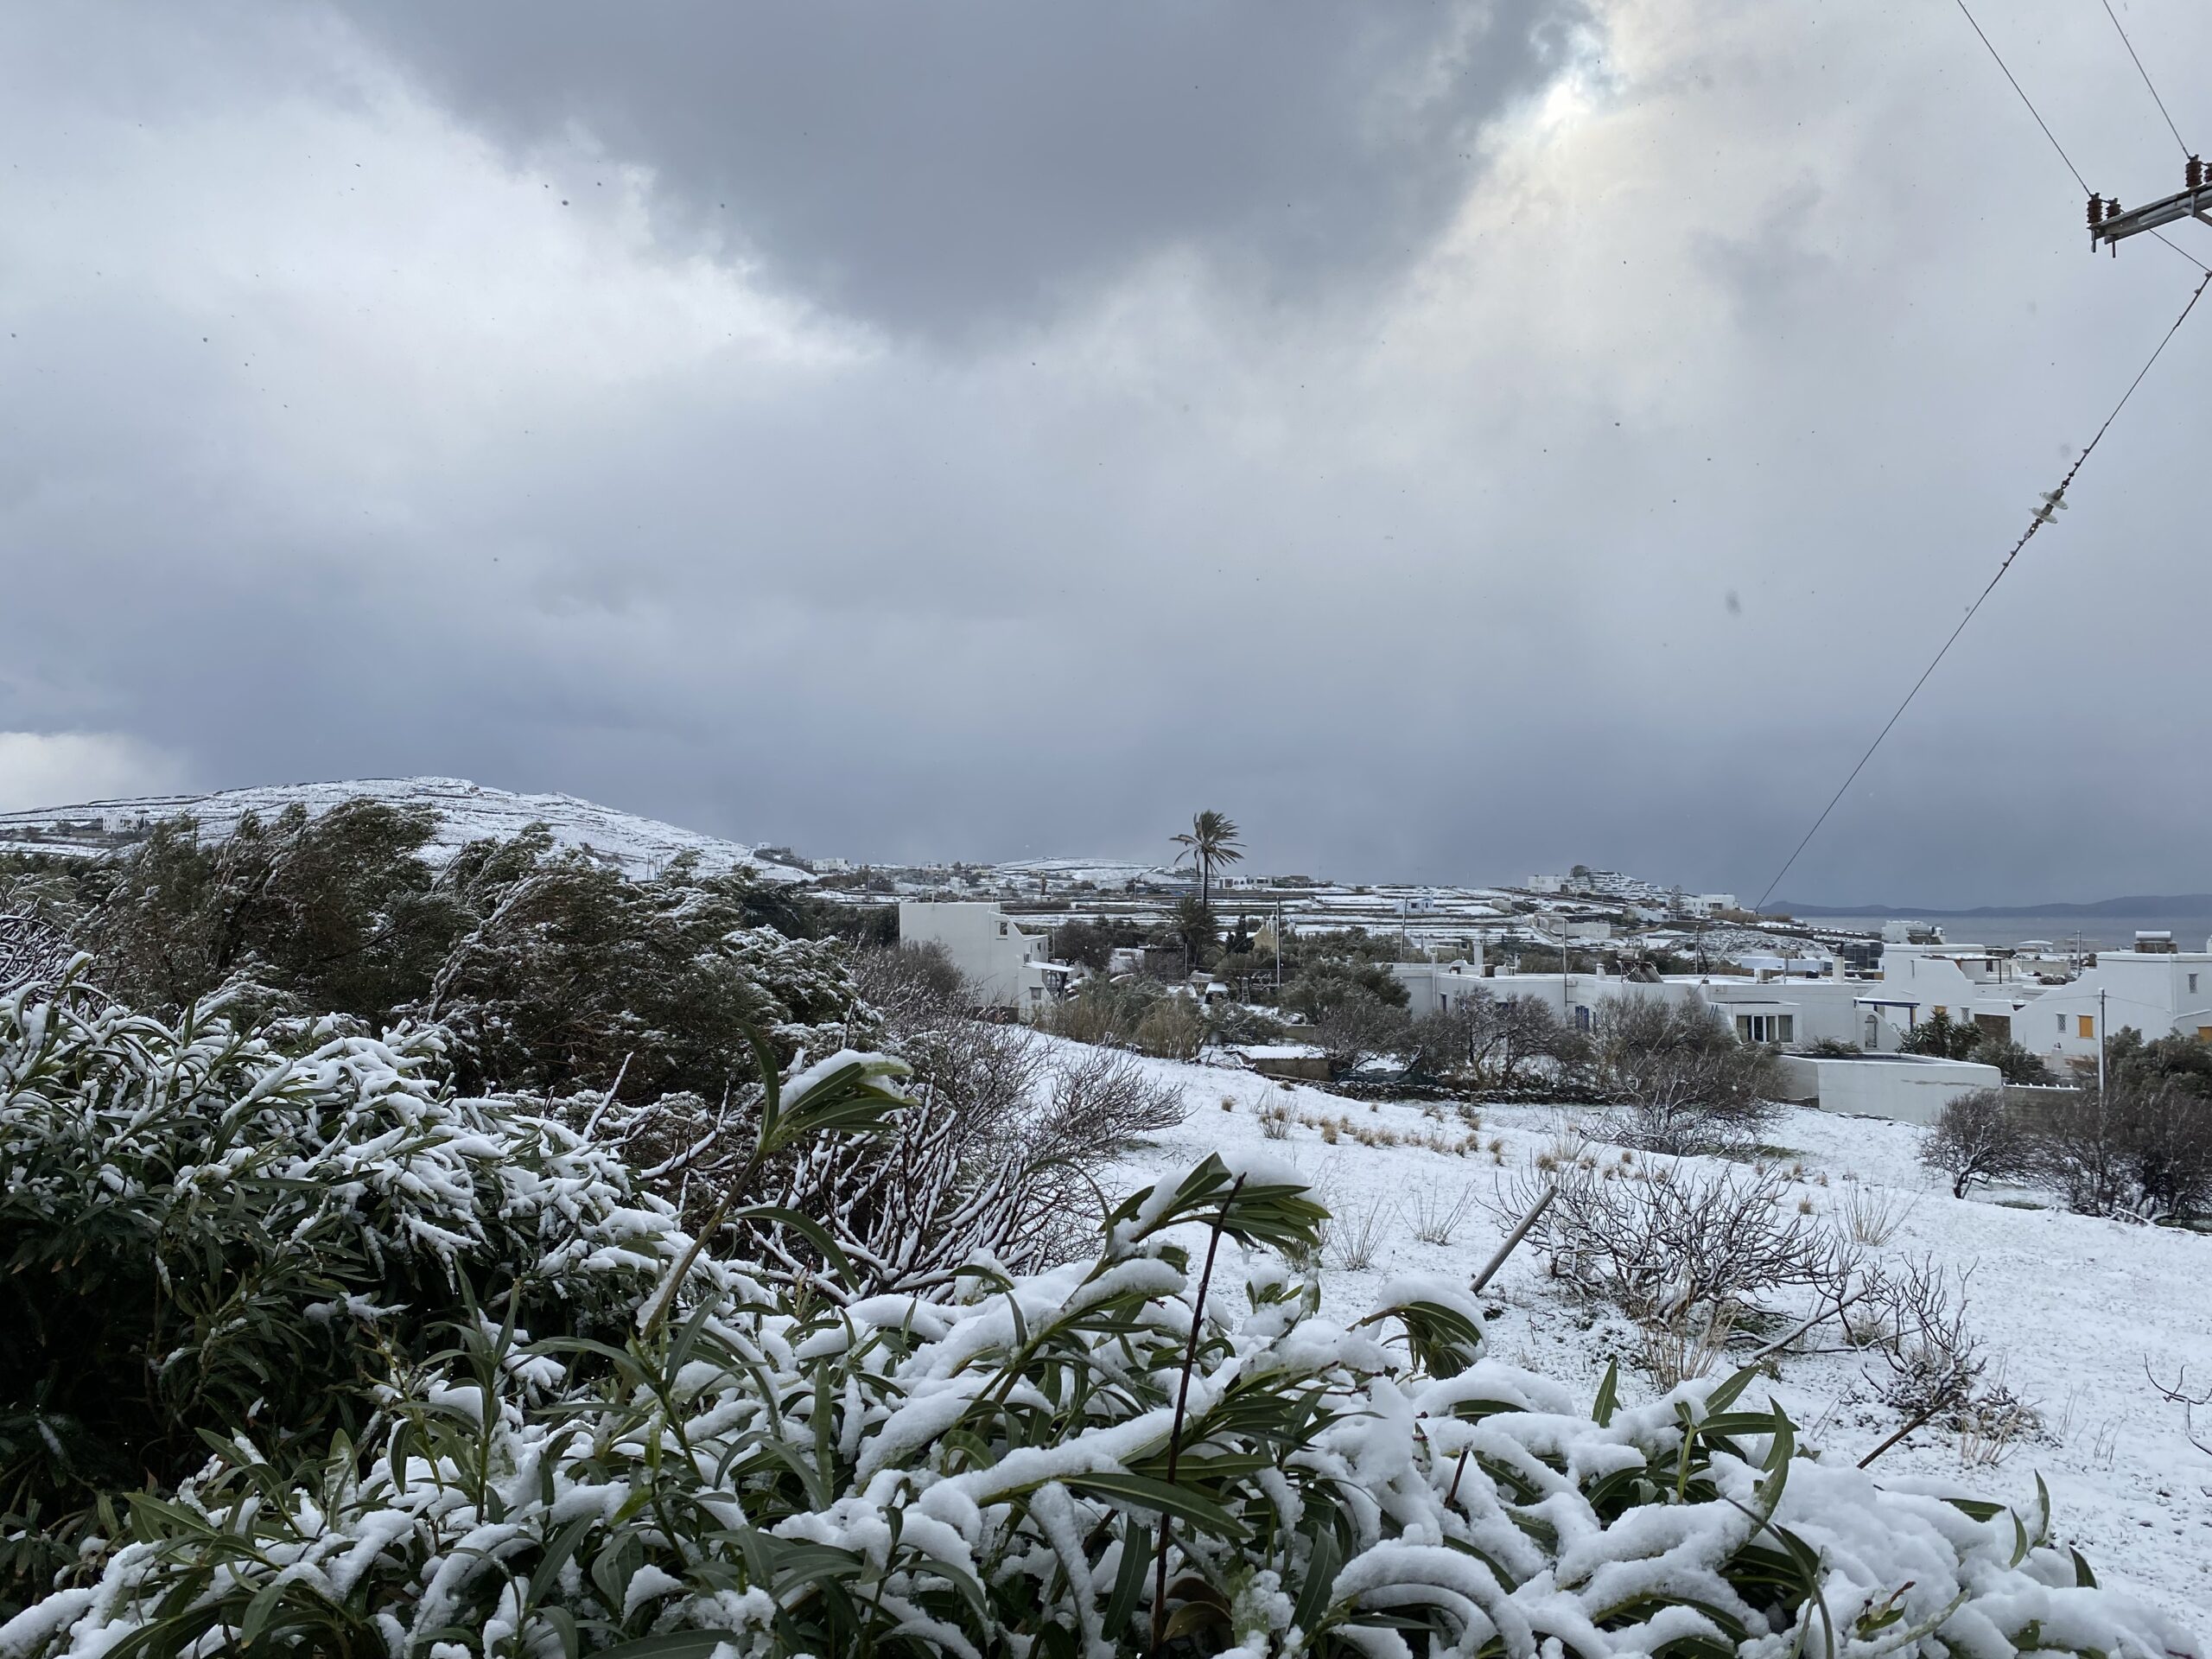 Cyclades island Tinos turned white by Elpis snowstorm 26